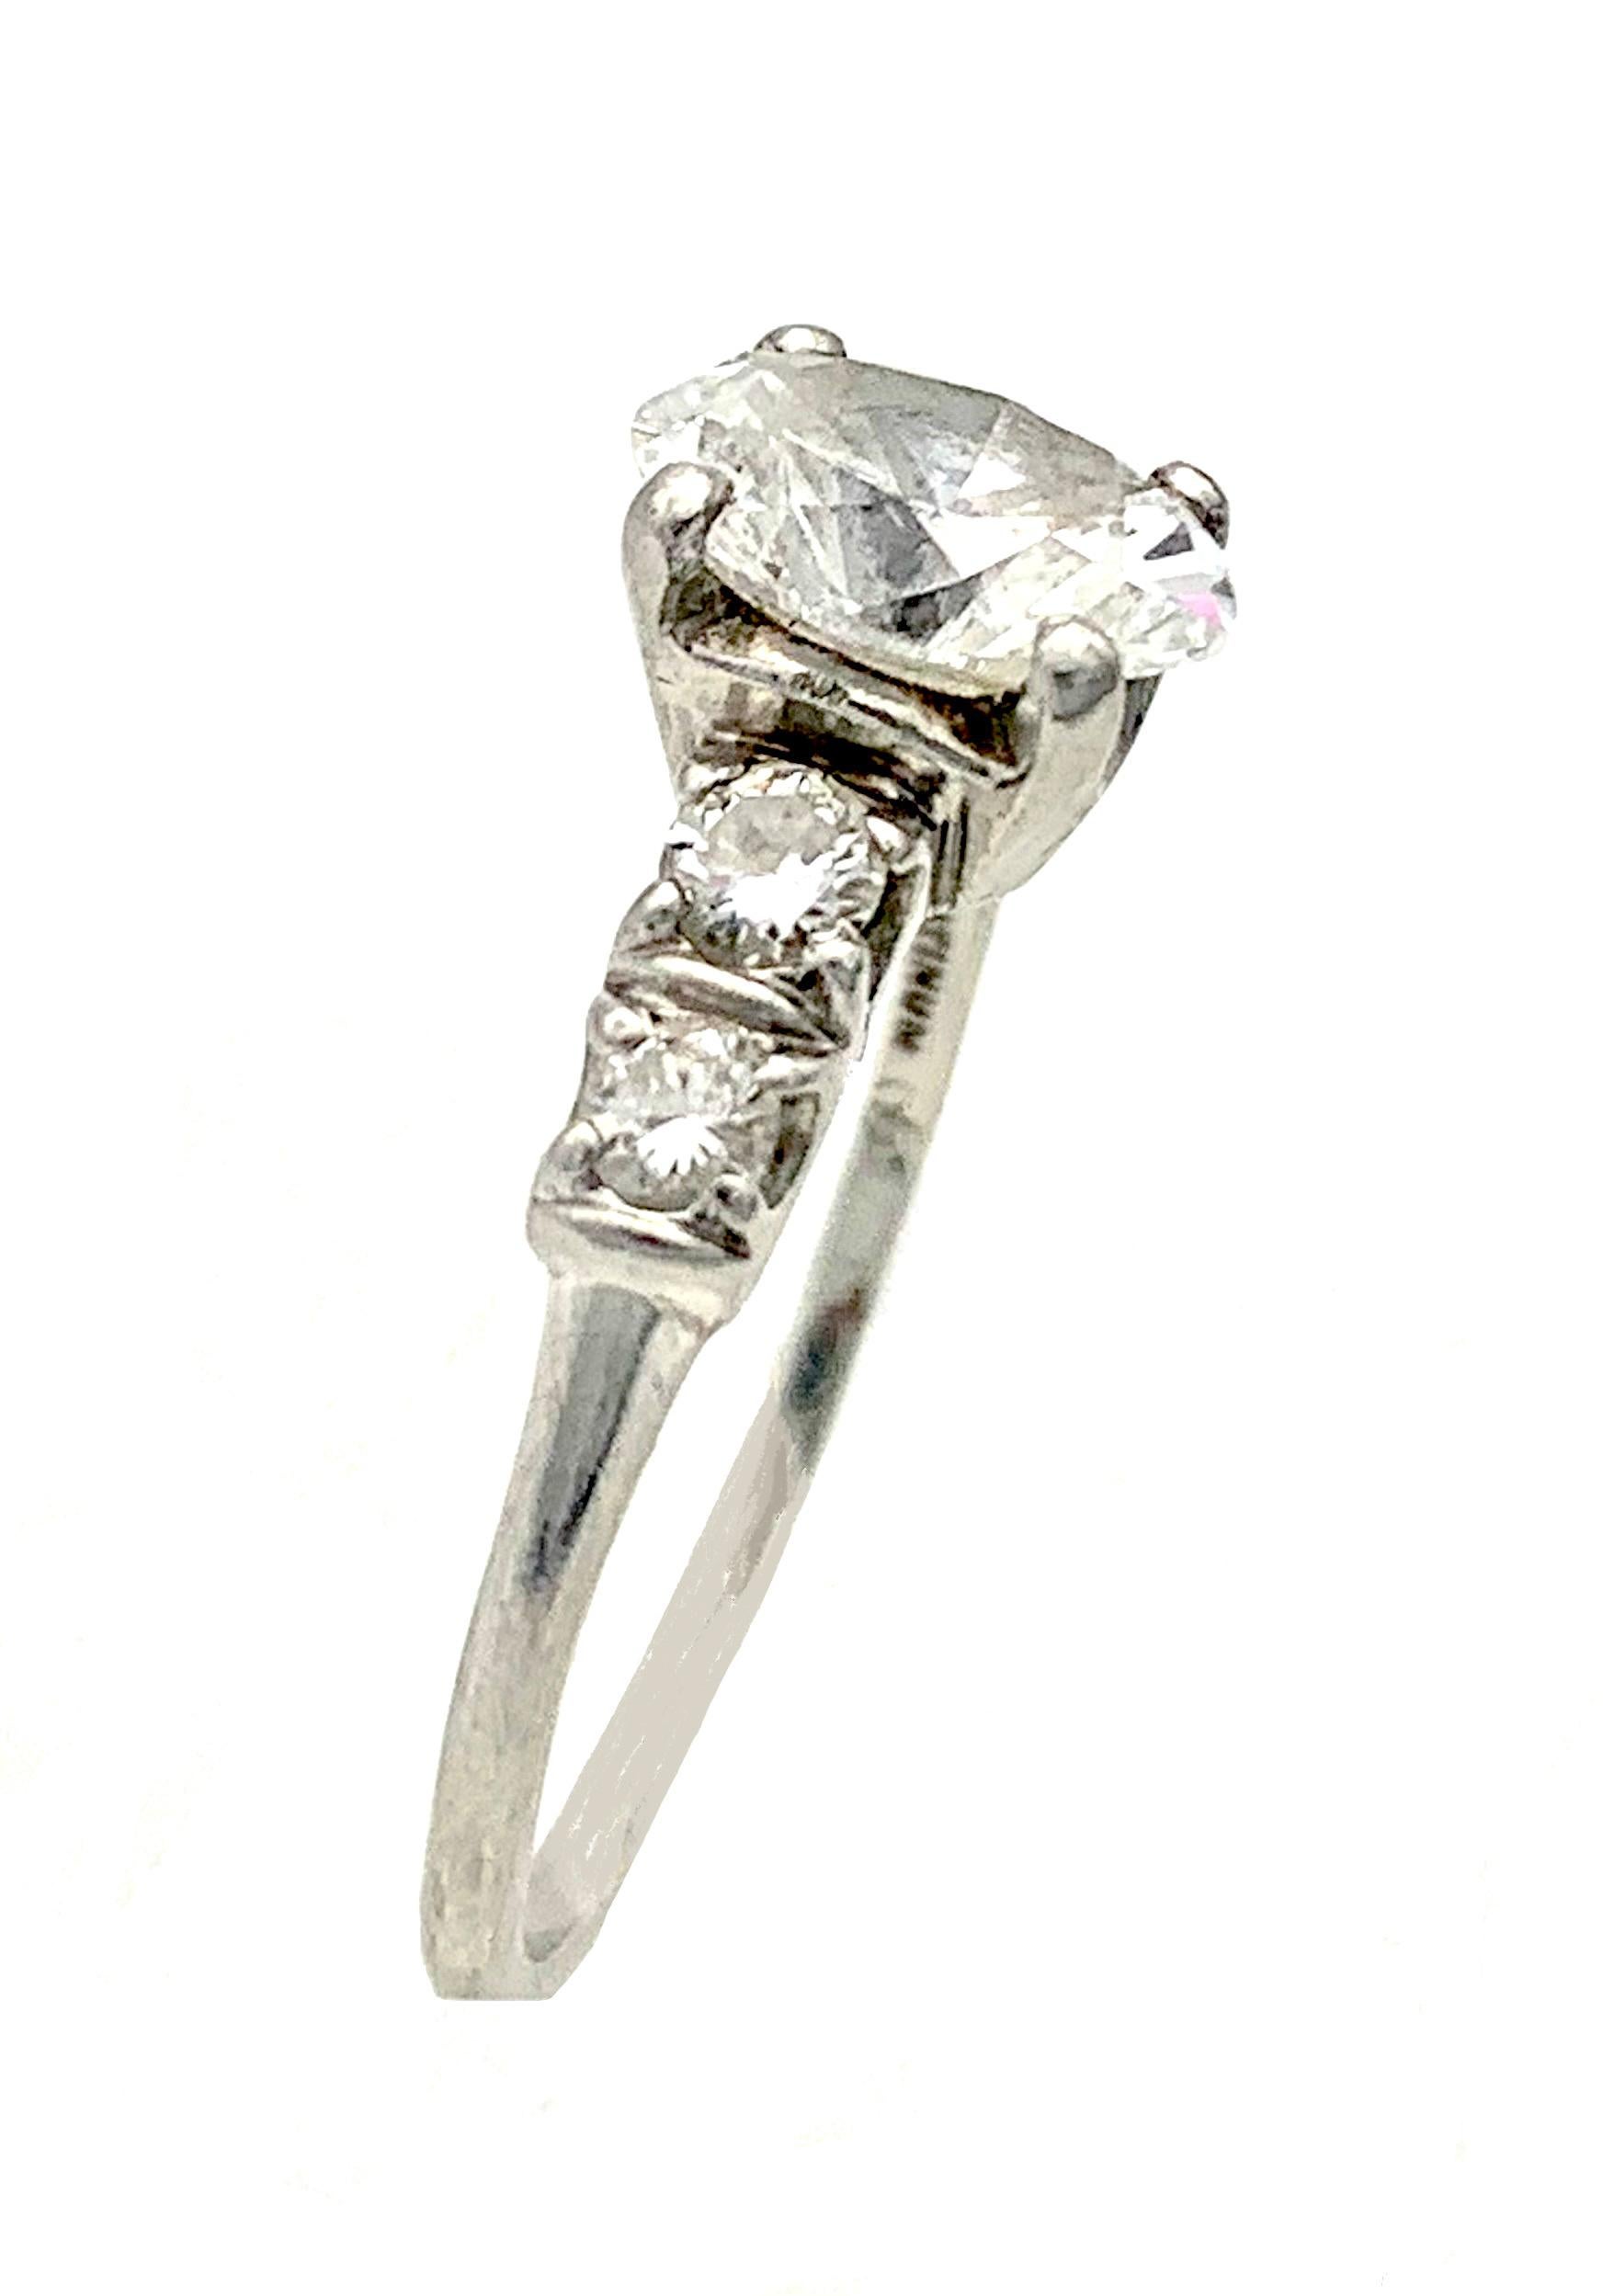 This elegant modern diamond ring Is accompanied by a G.I.A. from 2006 certificate stating that the oval brilliant cut diamond has the established weight of 1.11 carat. The colour of the diamond is E and the clarity VVS2. The oval diamond is mounted